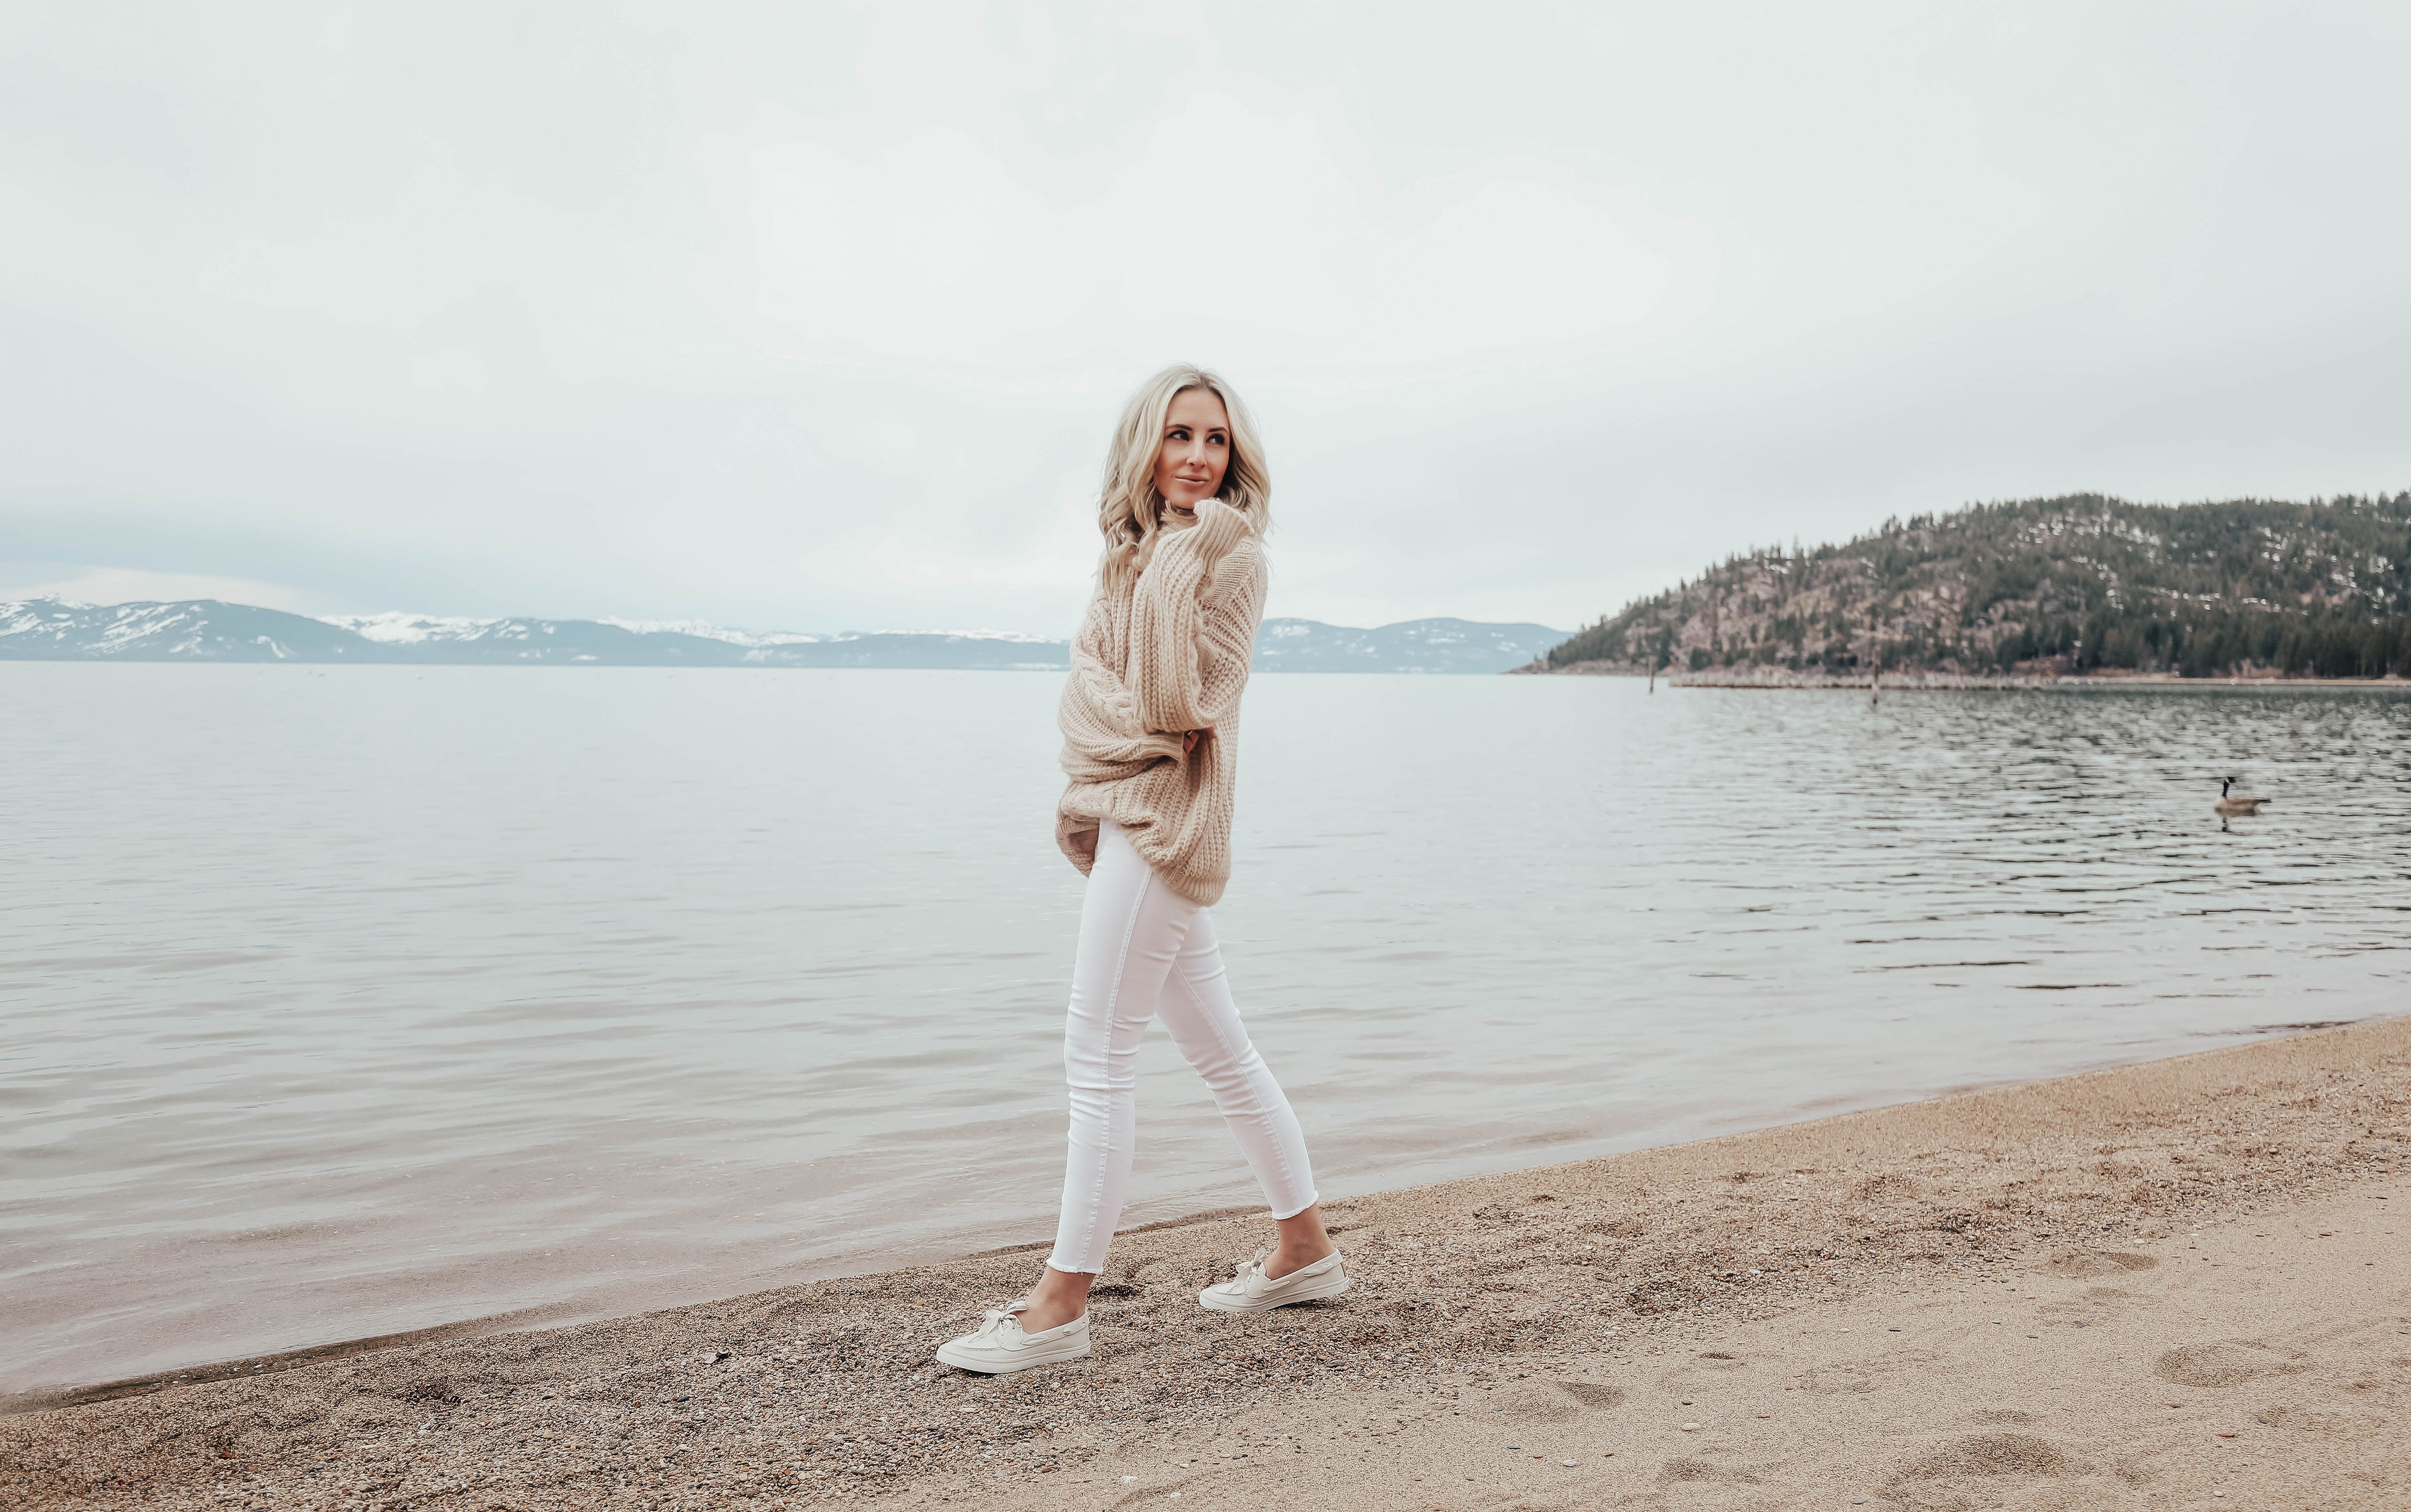 Reno Nevada Blogger, Emily Farren Wieczorek spends an afternoon at Glenbrook, Lake Tahoe wearing The Sperry Sailor Boat Shoe - a new take on a timeless classic